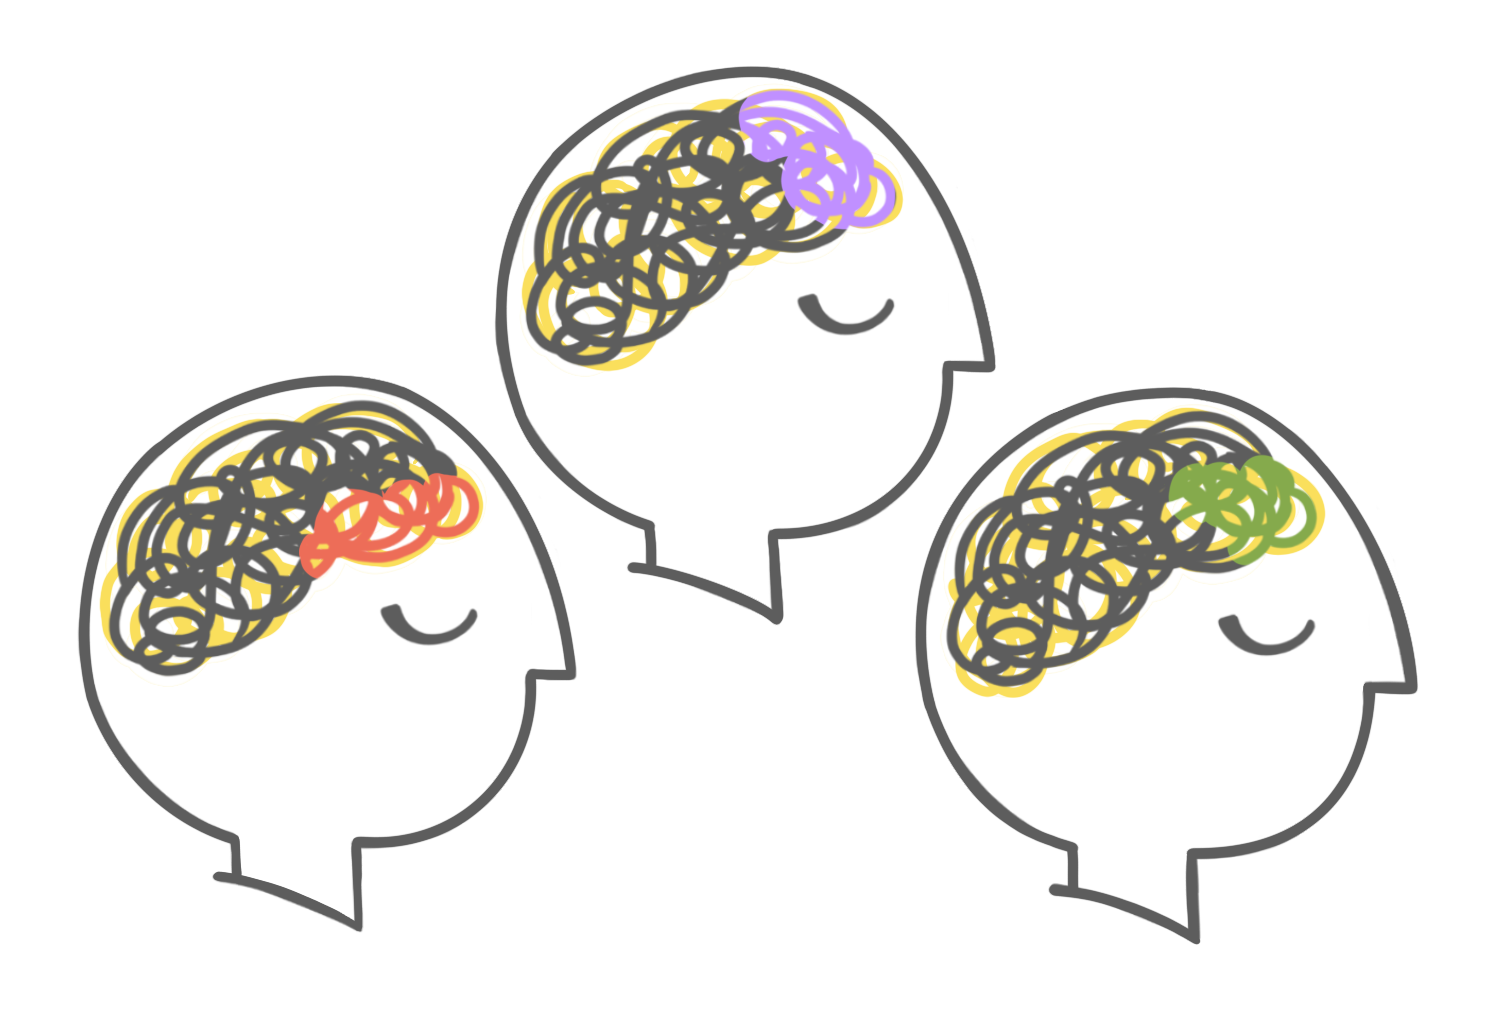 three sketched heads in profile, each with a brain shown as a bunch of spaghetti highlighted with yellow. Each of the three heads has part of their spaghetti showing as a different color: red, purple, or green